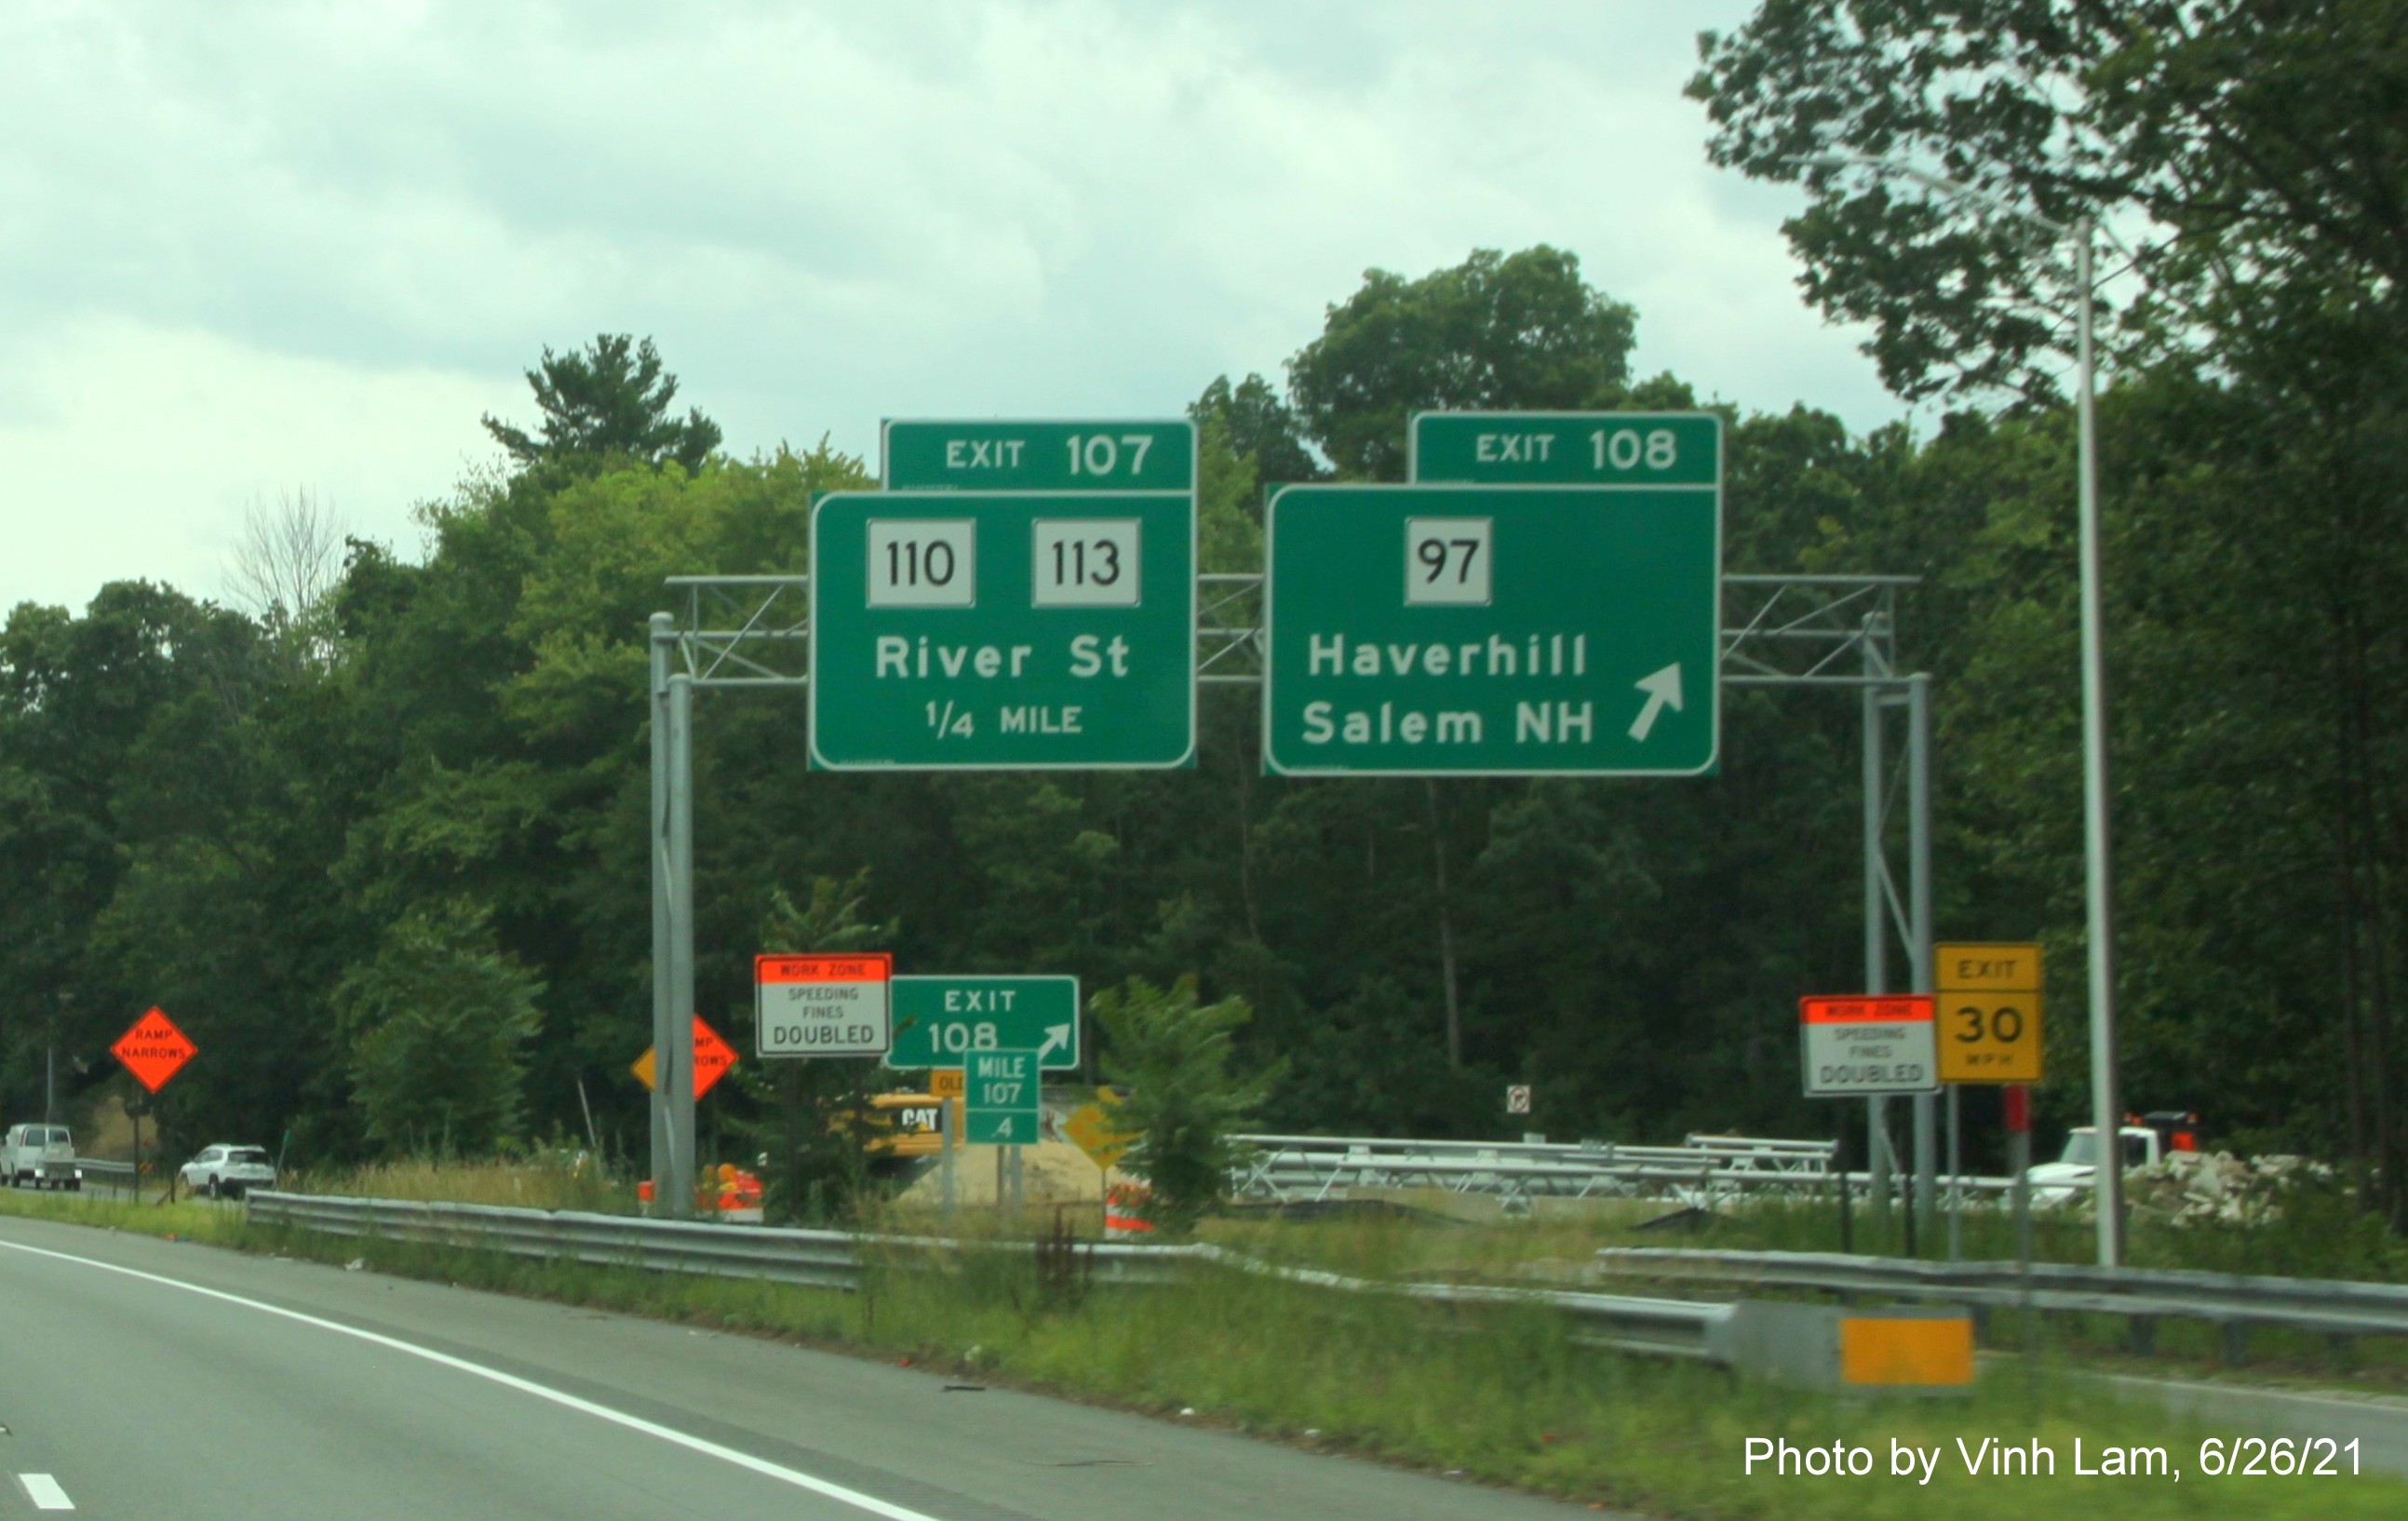 Image of overhead signage on C/D lanes at MA 97 exit with new milepost based exit numbers as seen from I-495 South in Haverhill, photo by Vinh Lam, June 2021